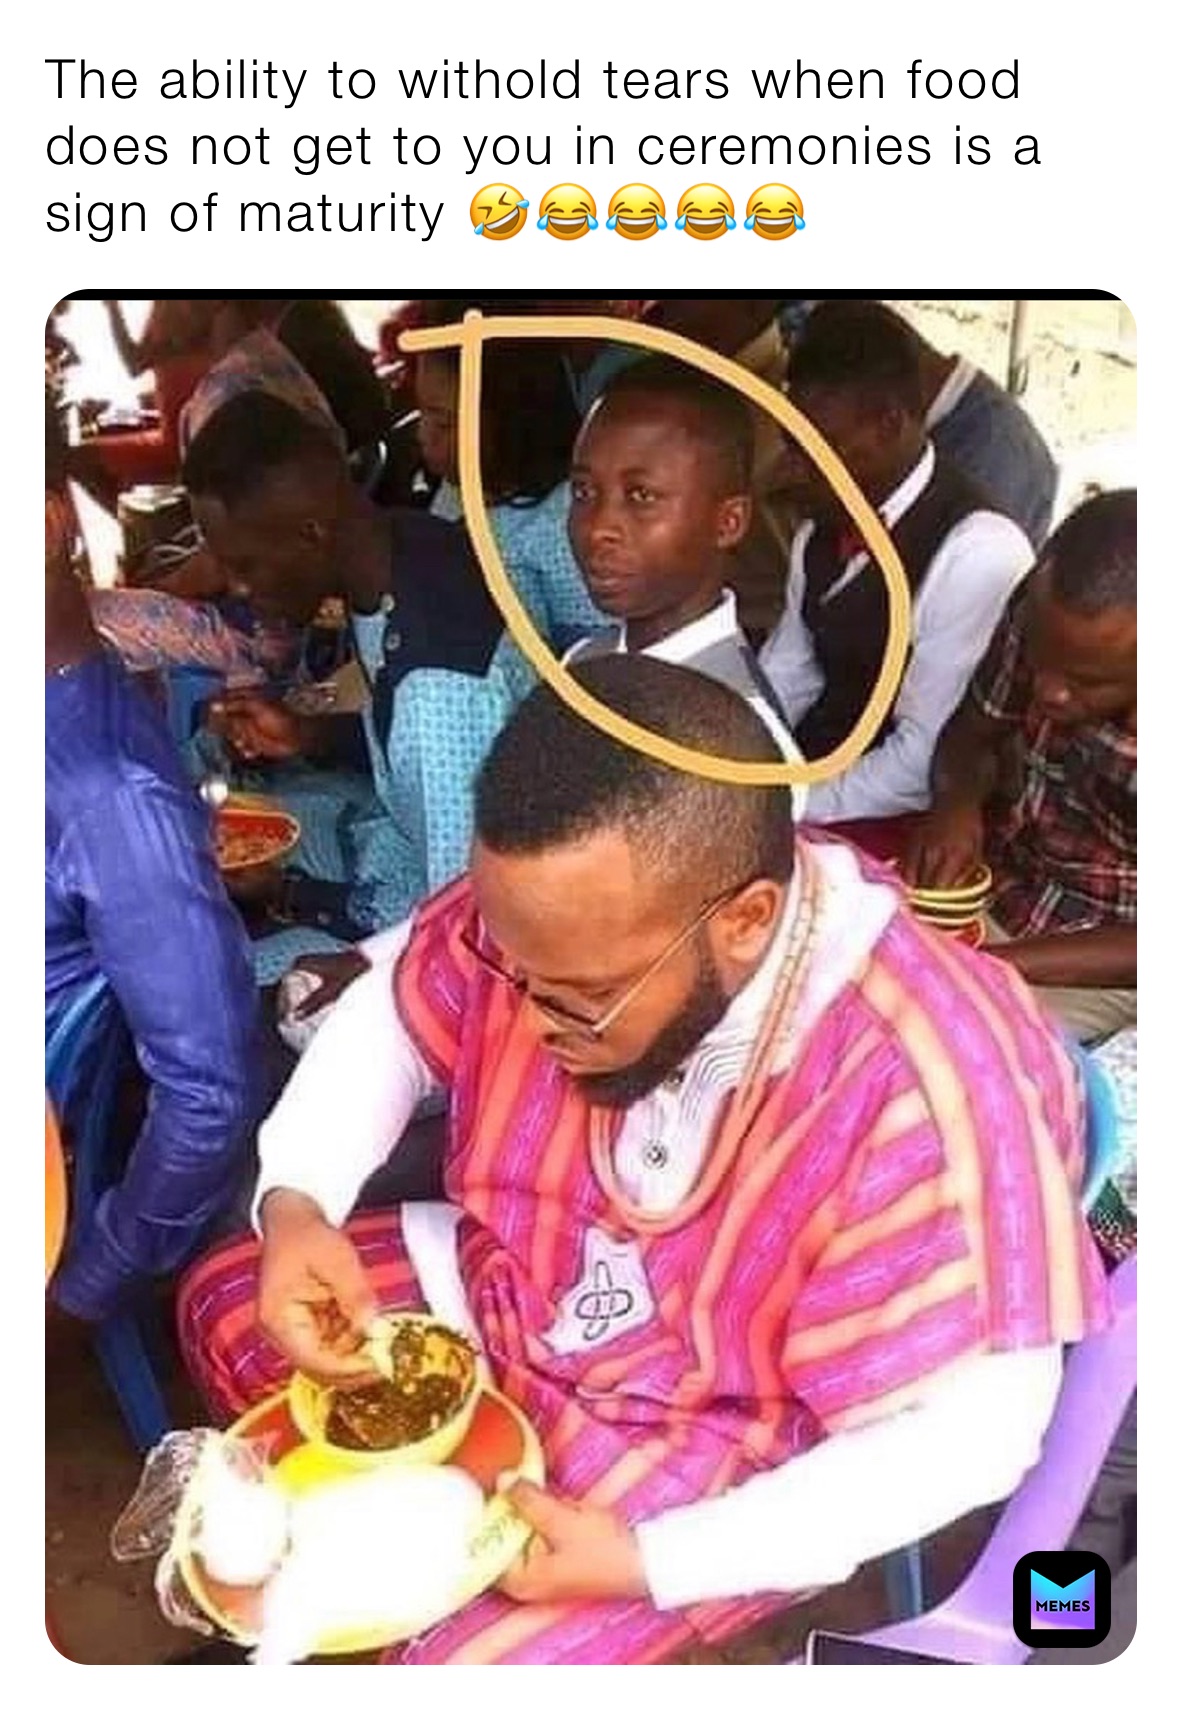 The ability to withold tears when food does not get to you in ceremonies is a sign of maturity 🤣😂😂😂😂